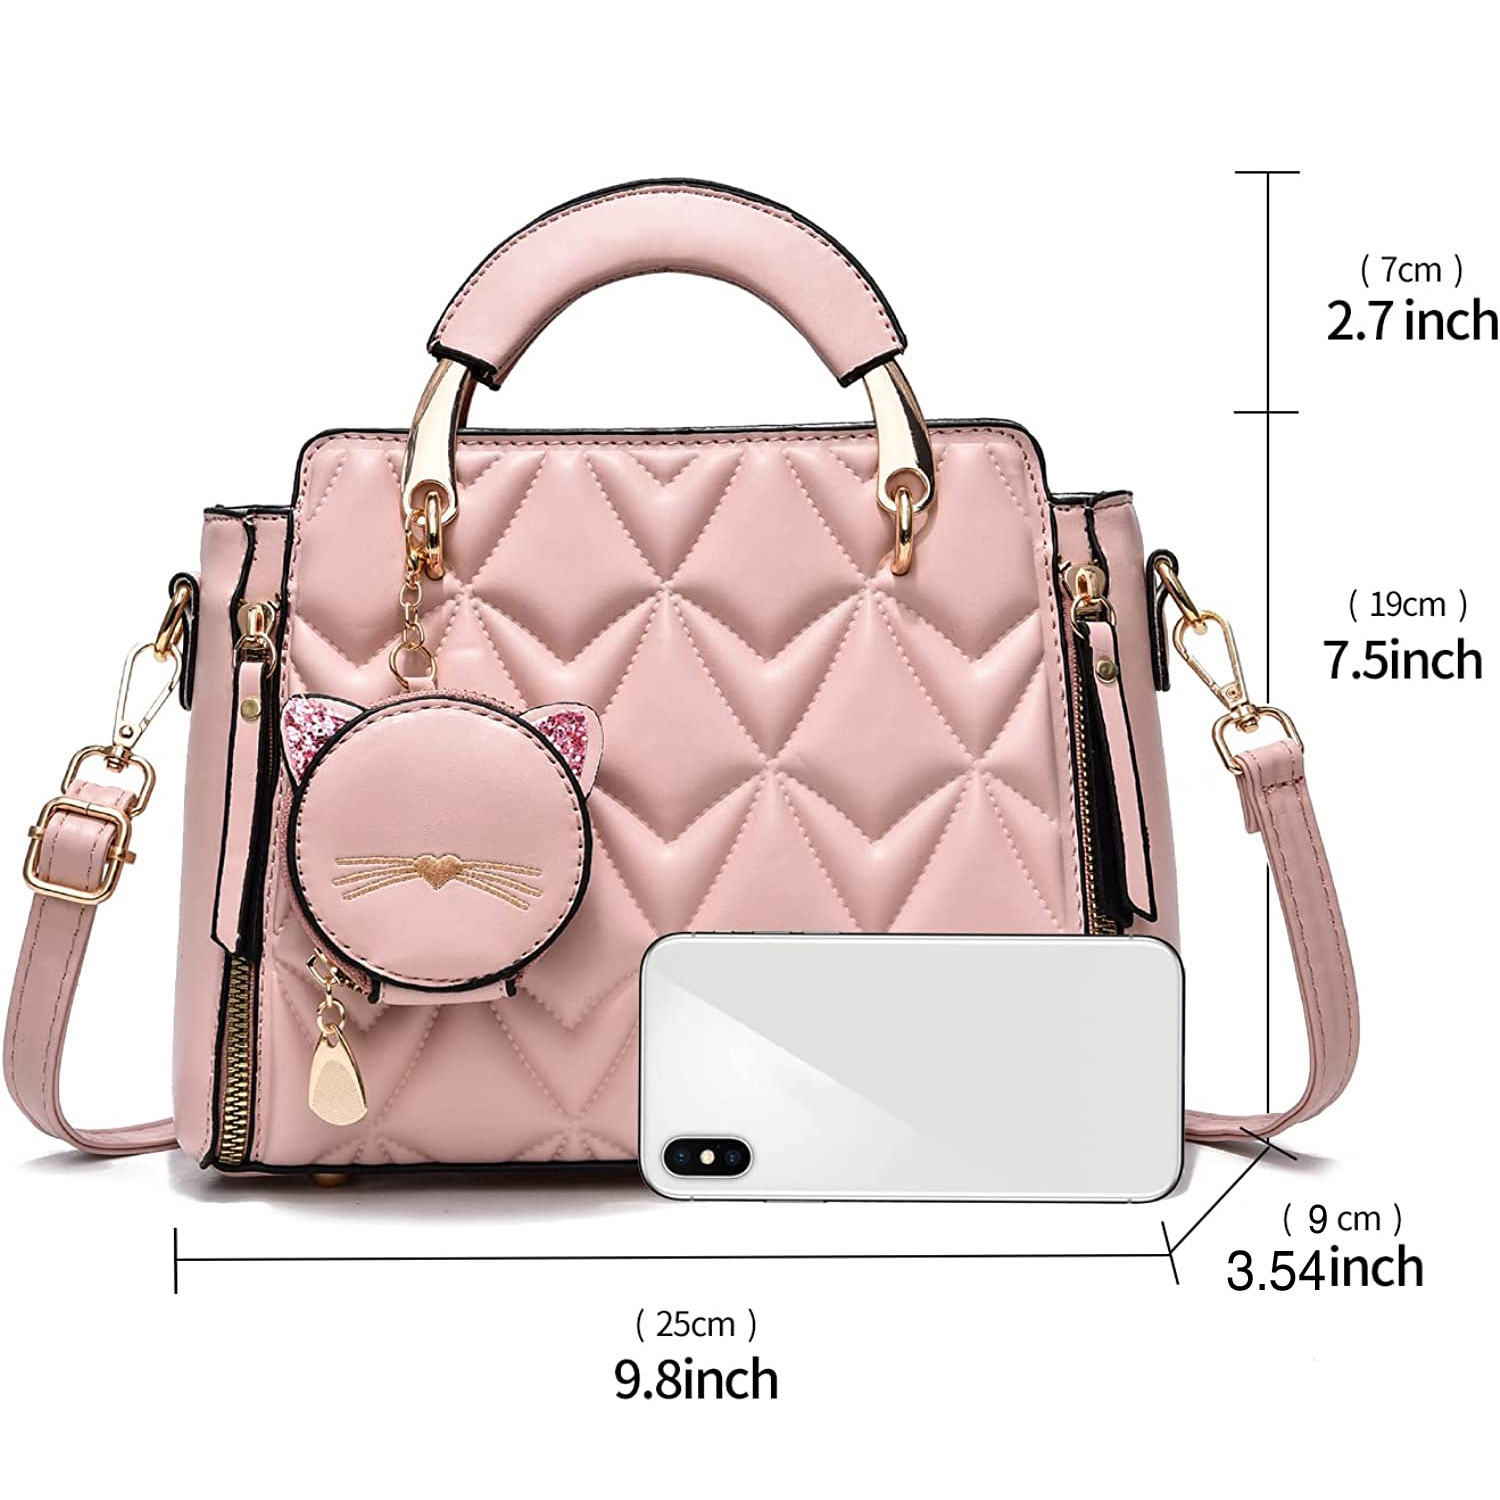 Large Purses for Women Shoulder Handbags Large Crossbody Cute Bag for Women with Small Purses,Pink - image 2 of 9